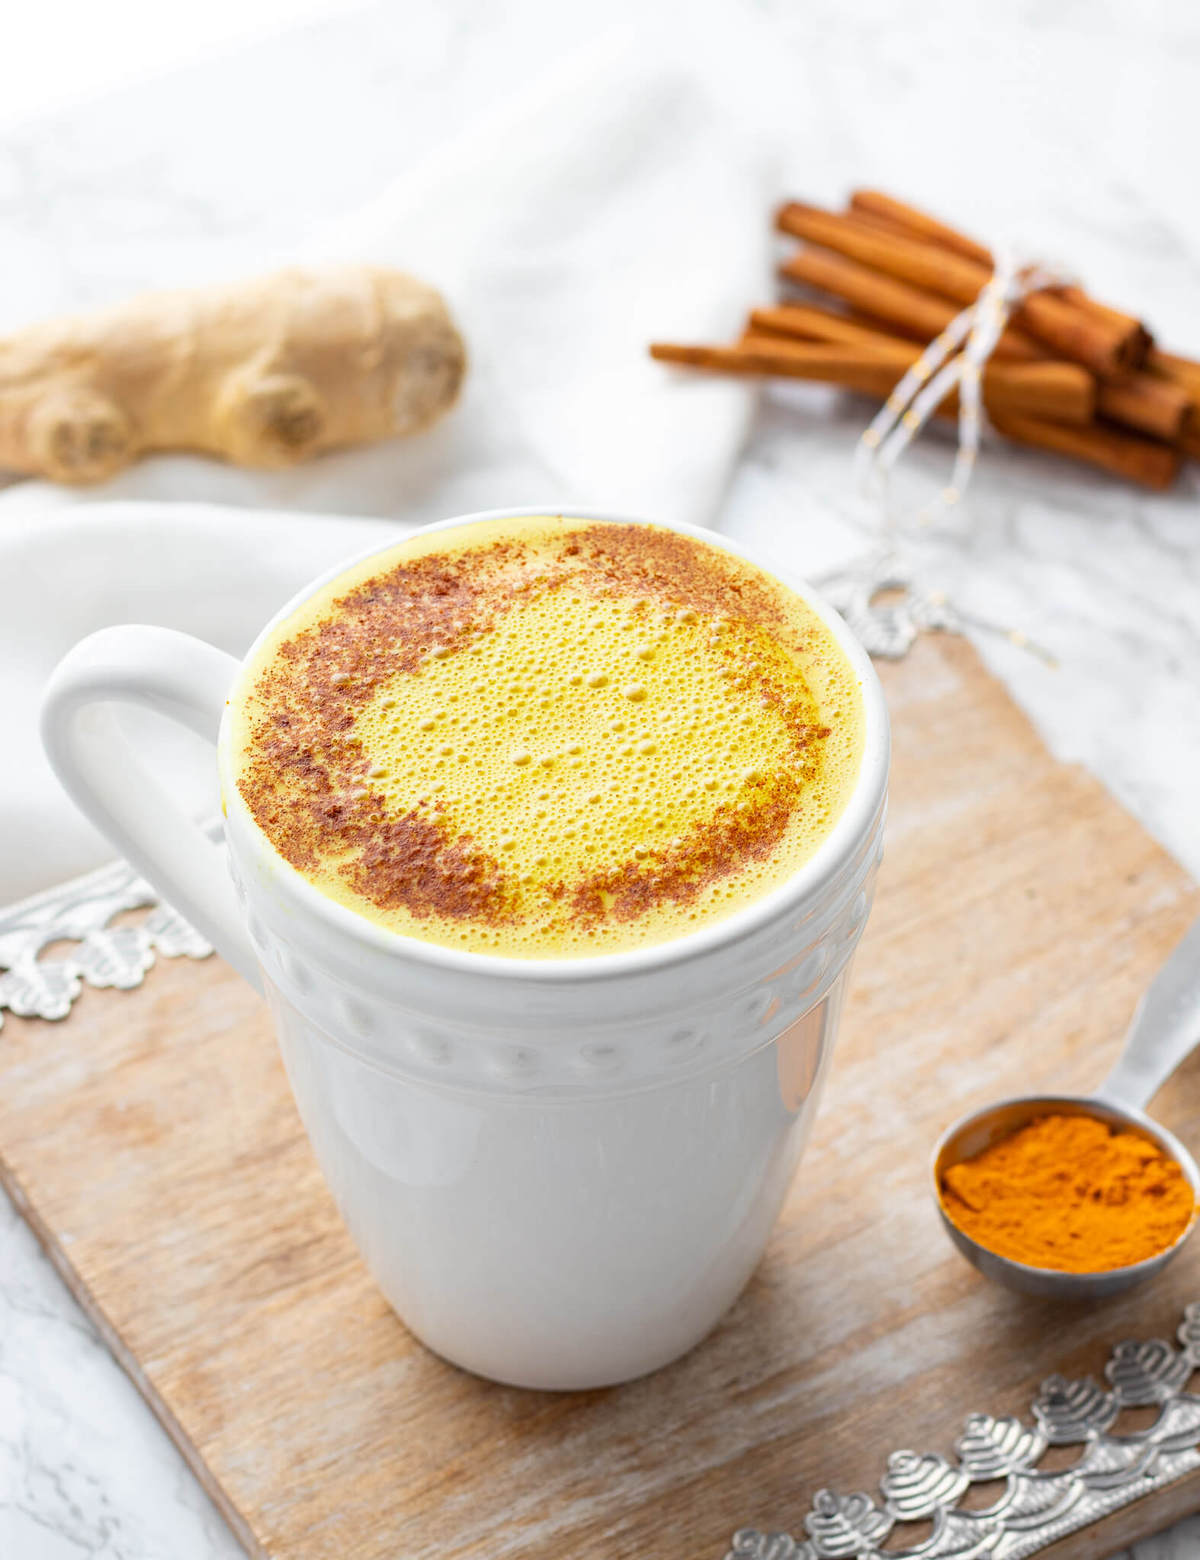 Turmeric latte with a spoonful of turmeric, cinnamon stick and ginger.